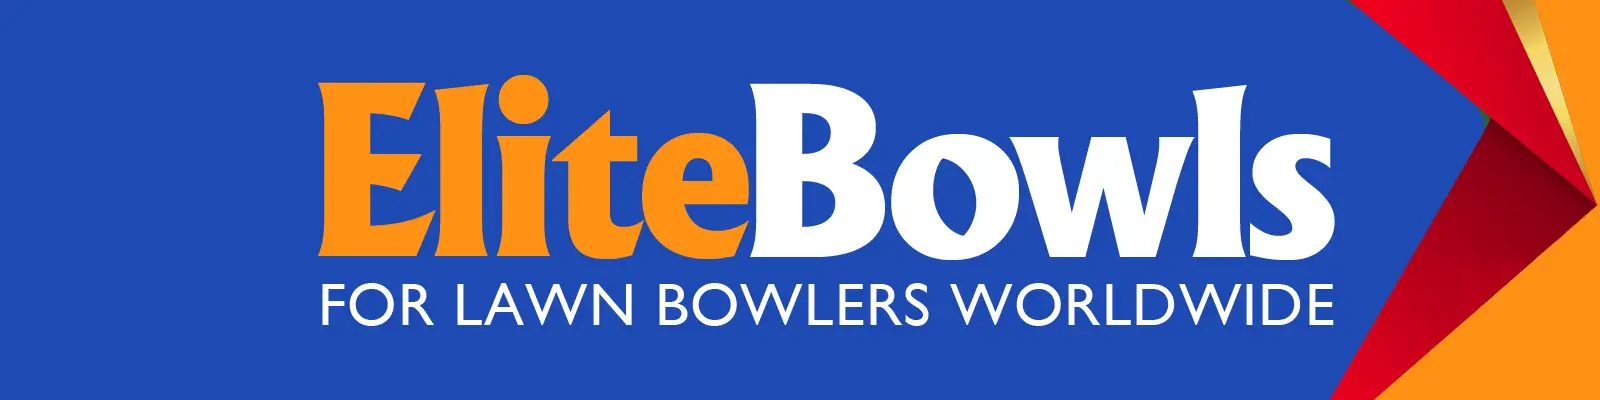 Elite Bowls Information for Lawn Bowlers